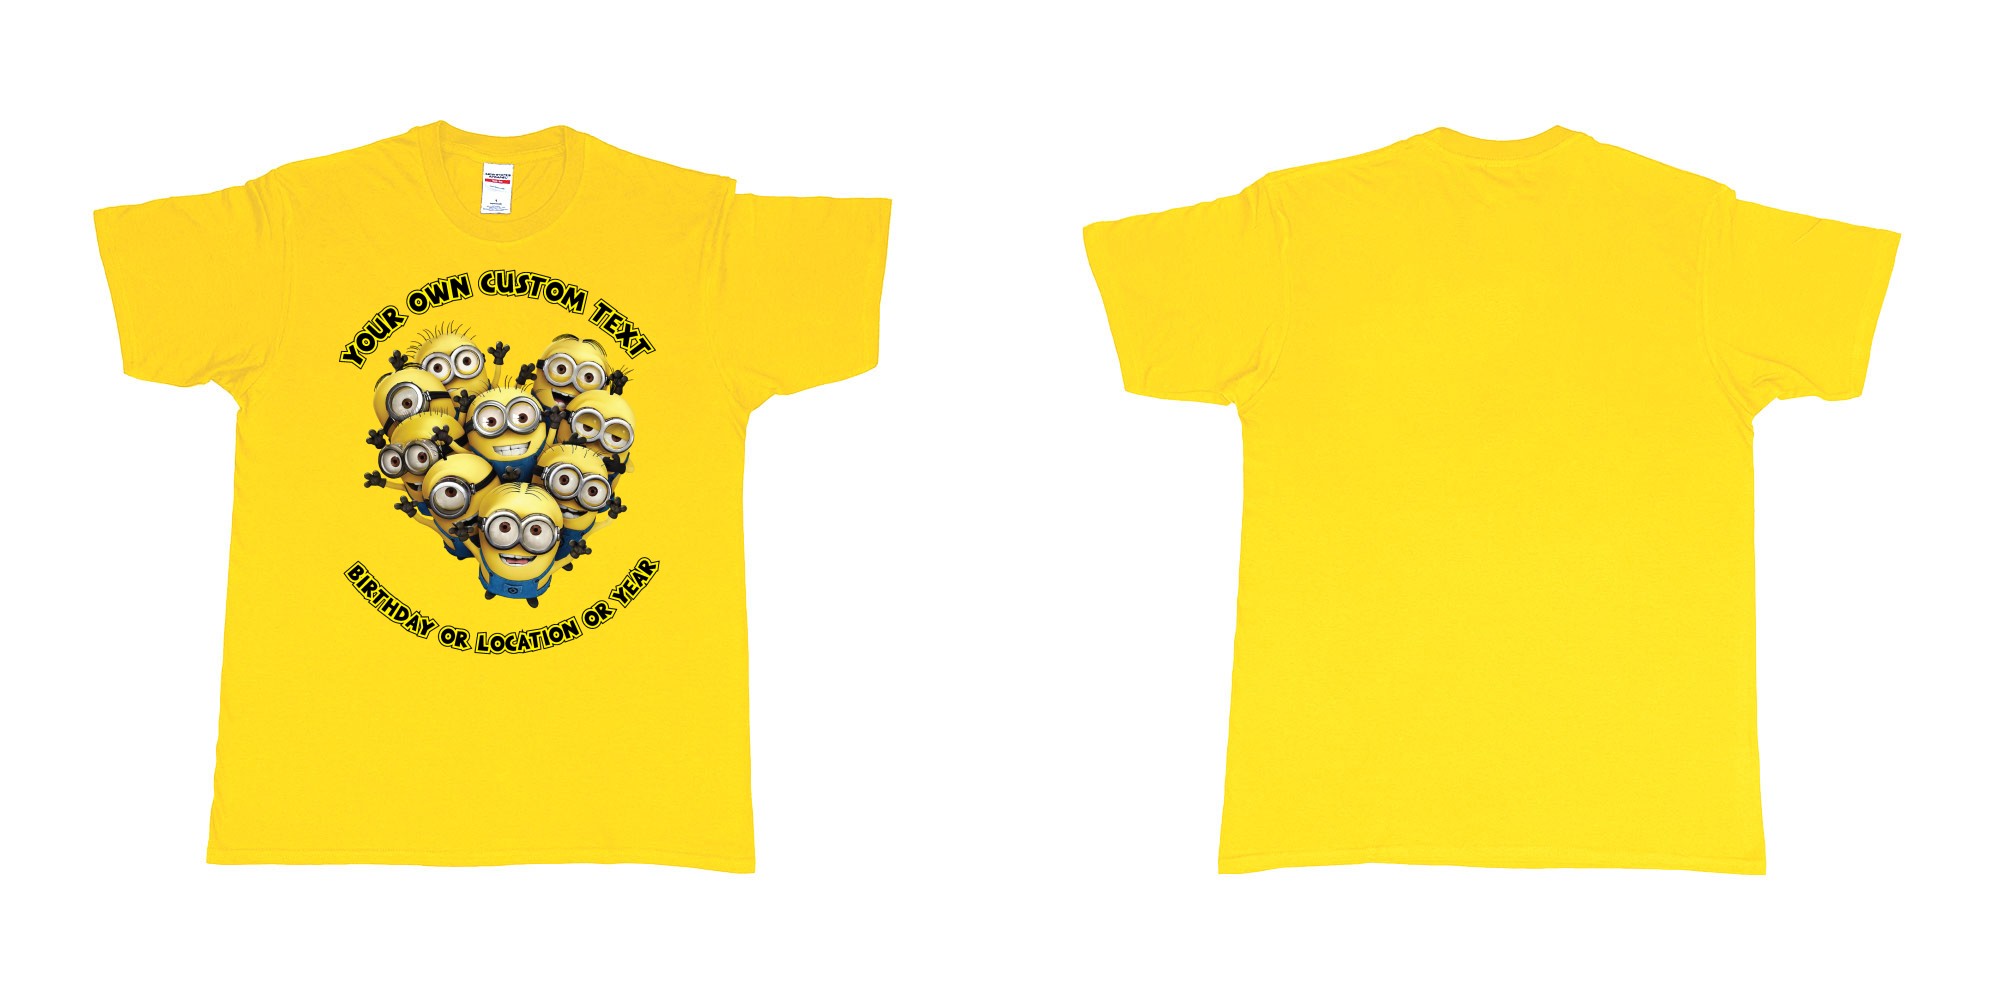 Custom tshirt design minions celebrating you in fabric color daisy choice your own text made in Bali by The Pirate Way